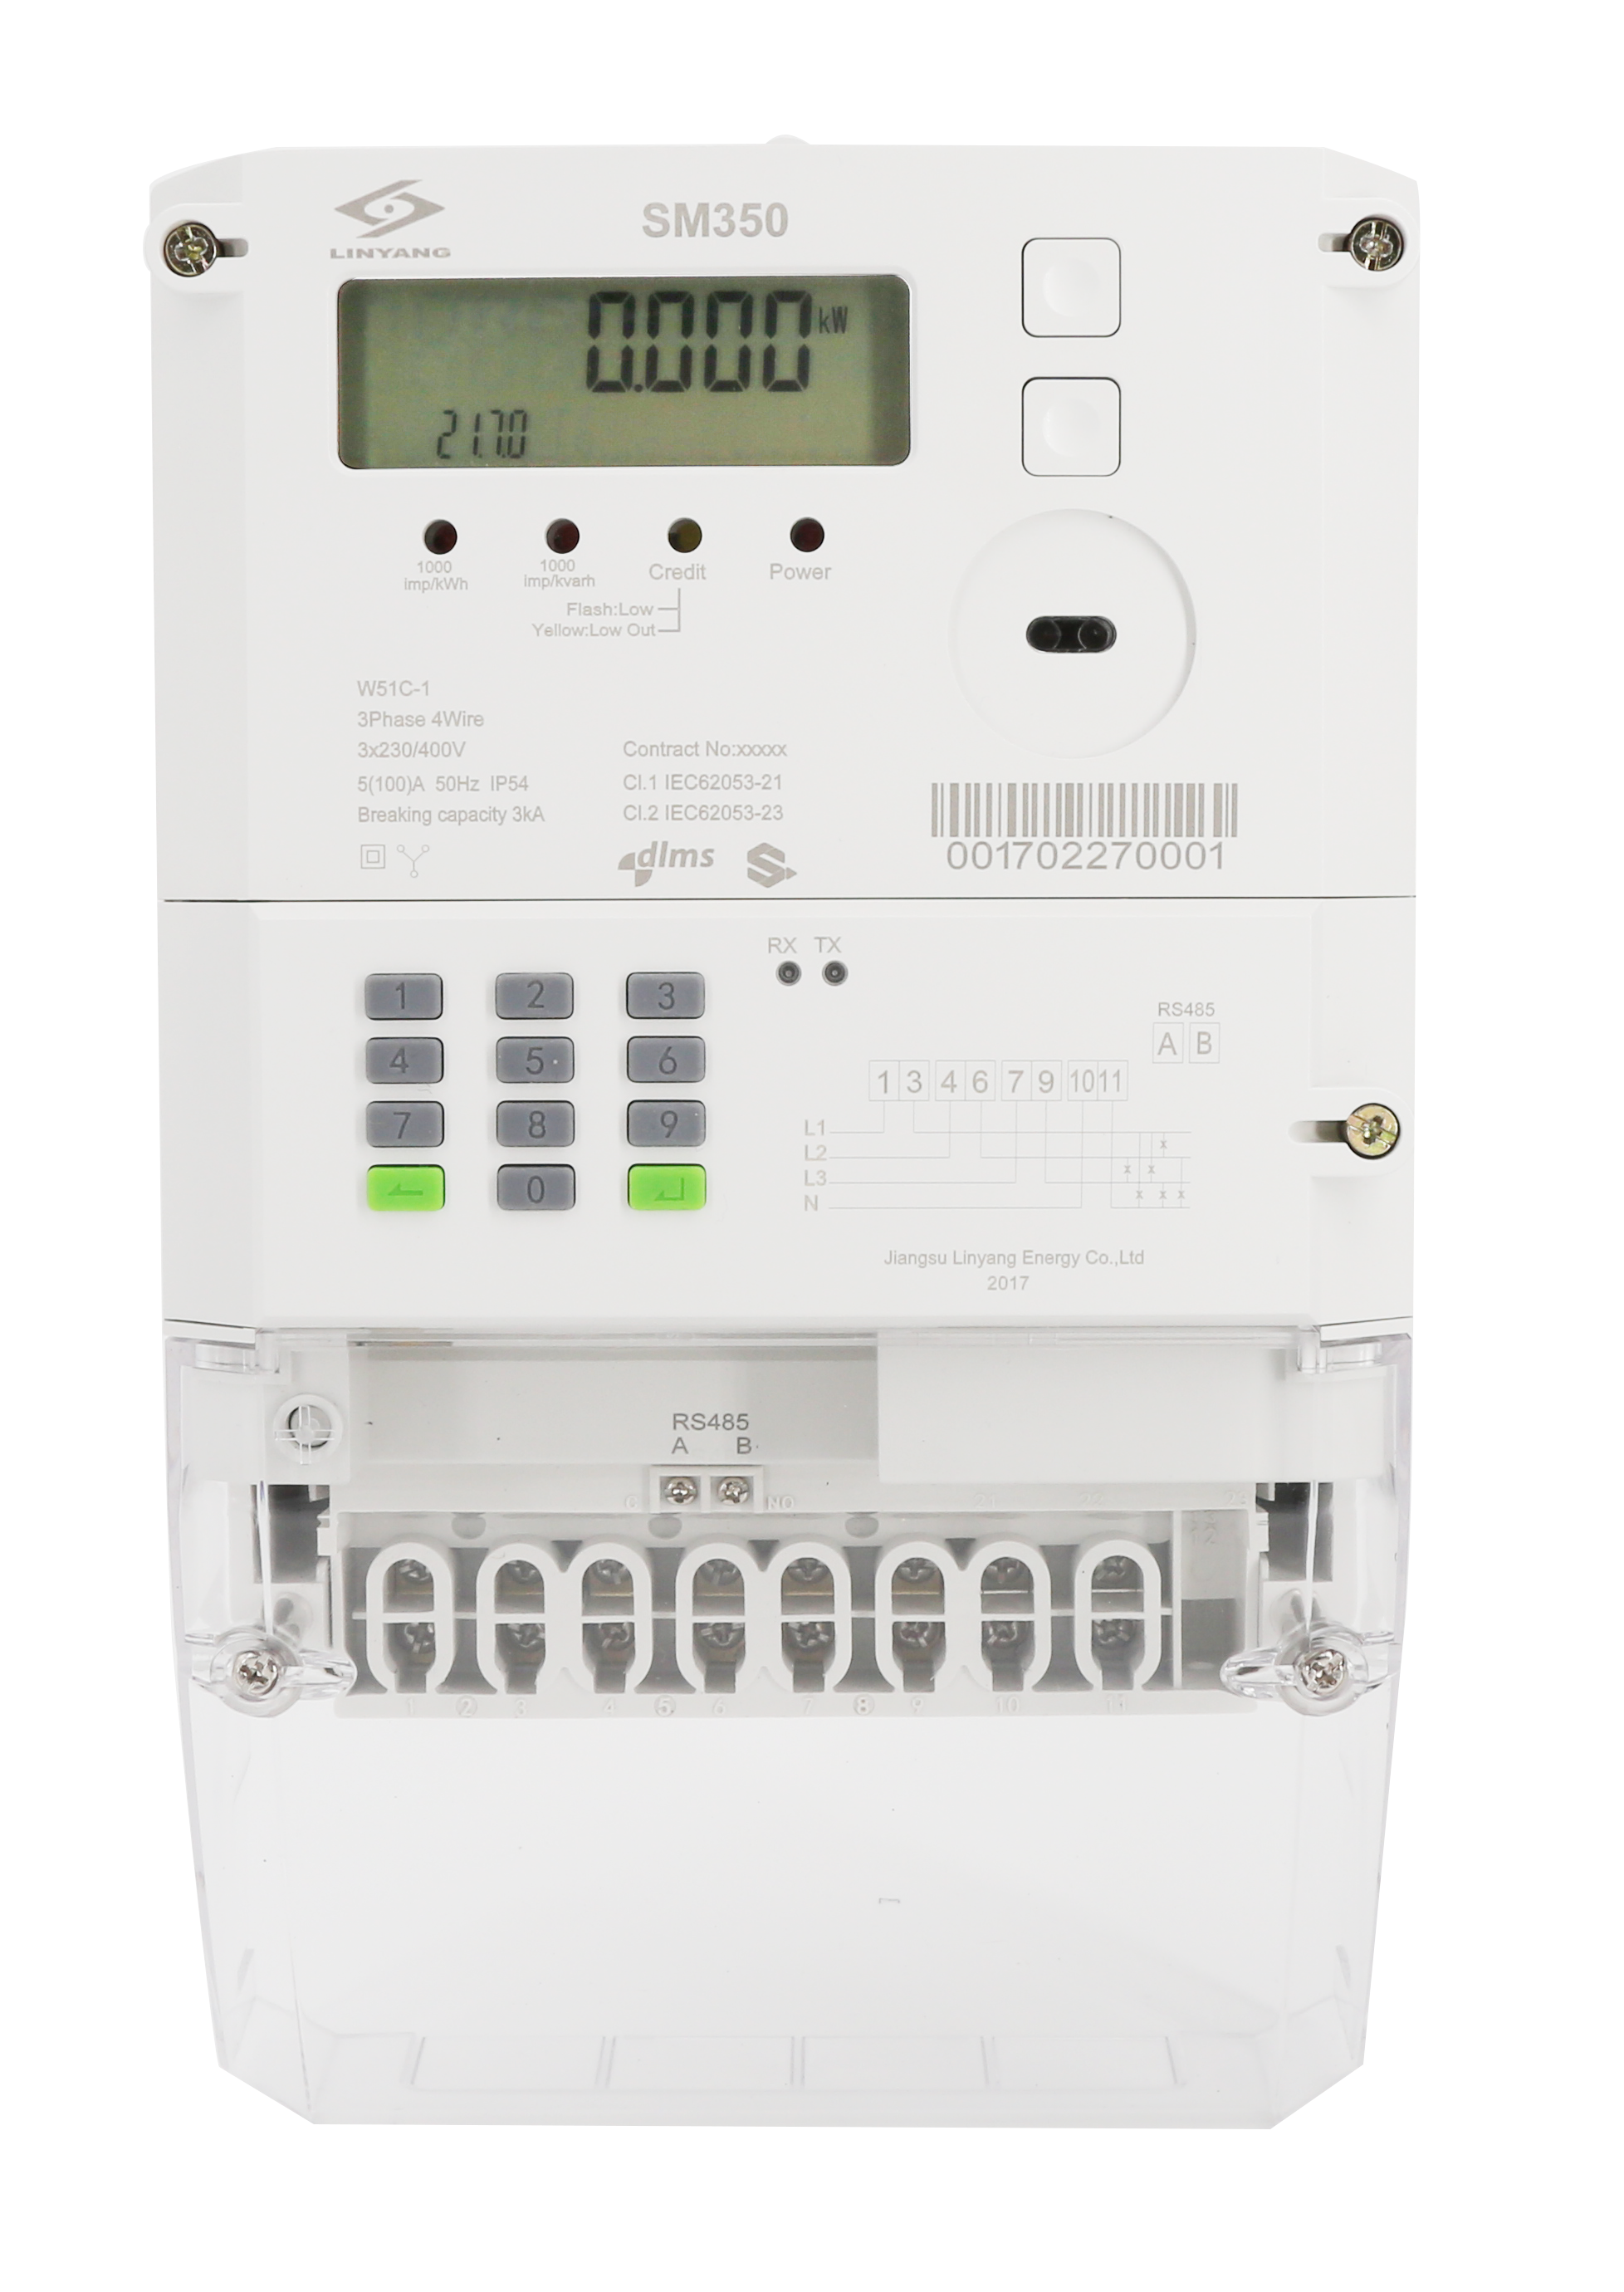 Basic knowledge about Electricity Meters